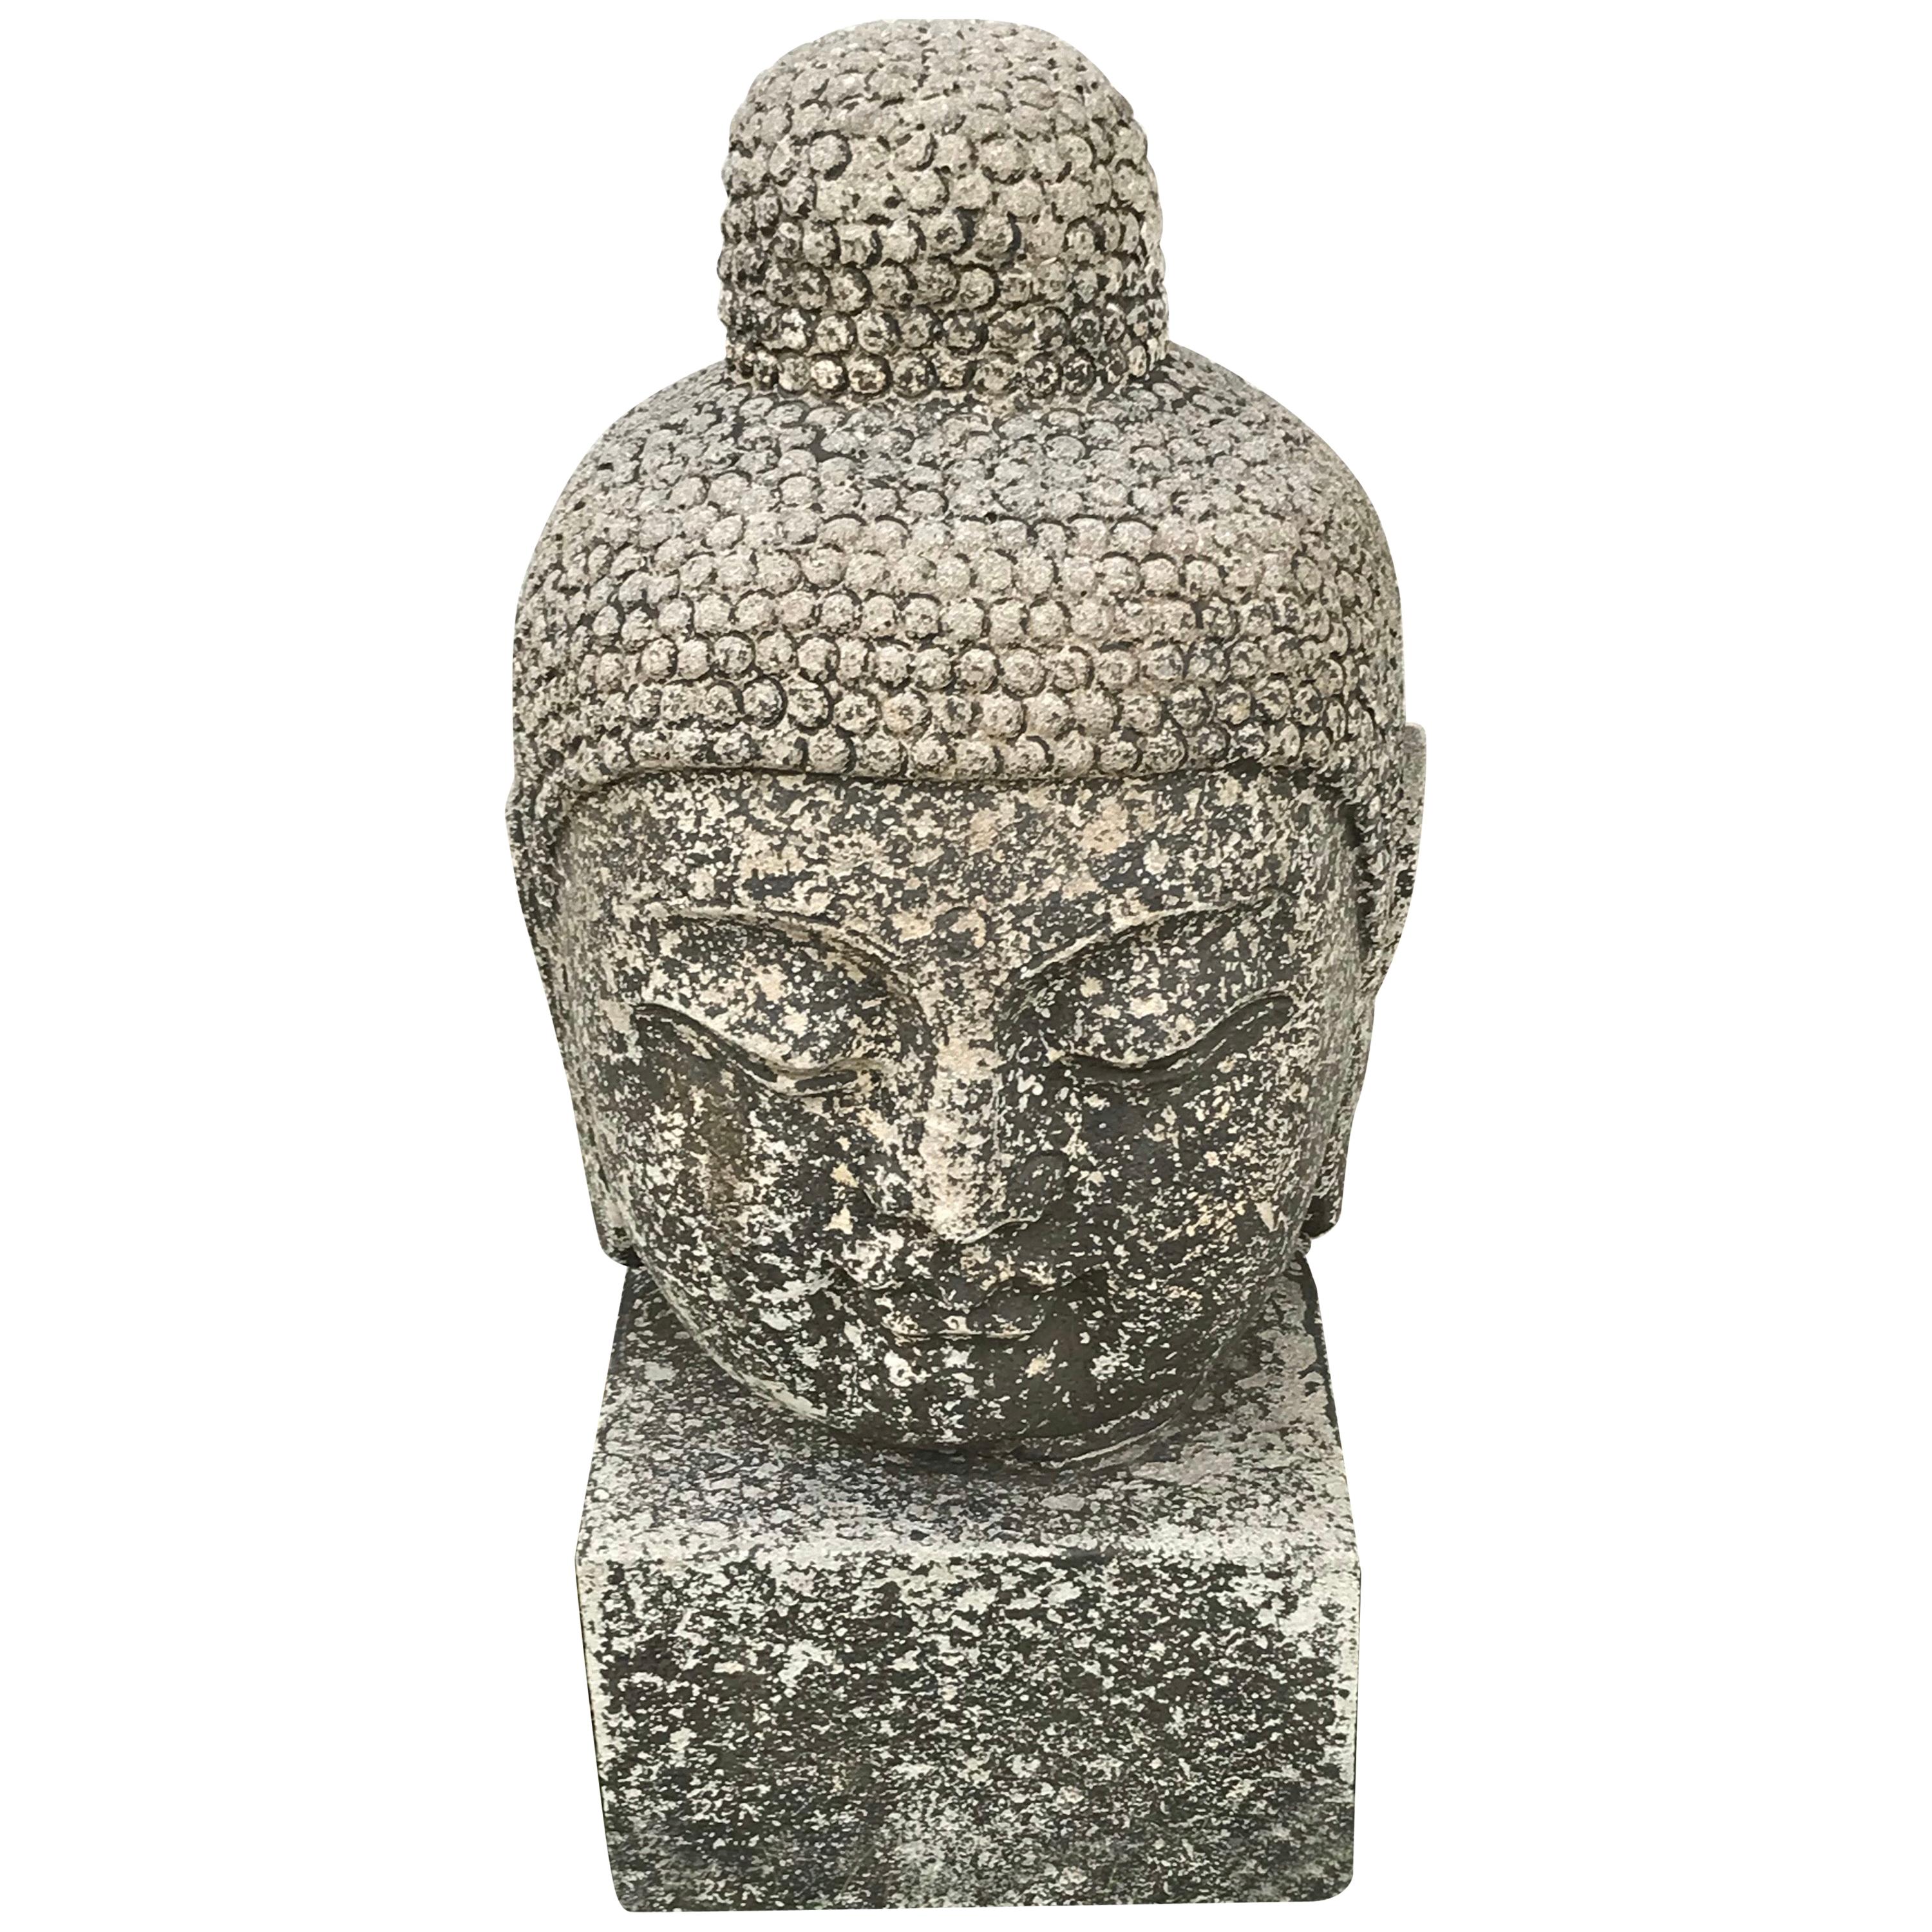 Early 20th Century Carved Stone Buddha Head